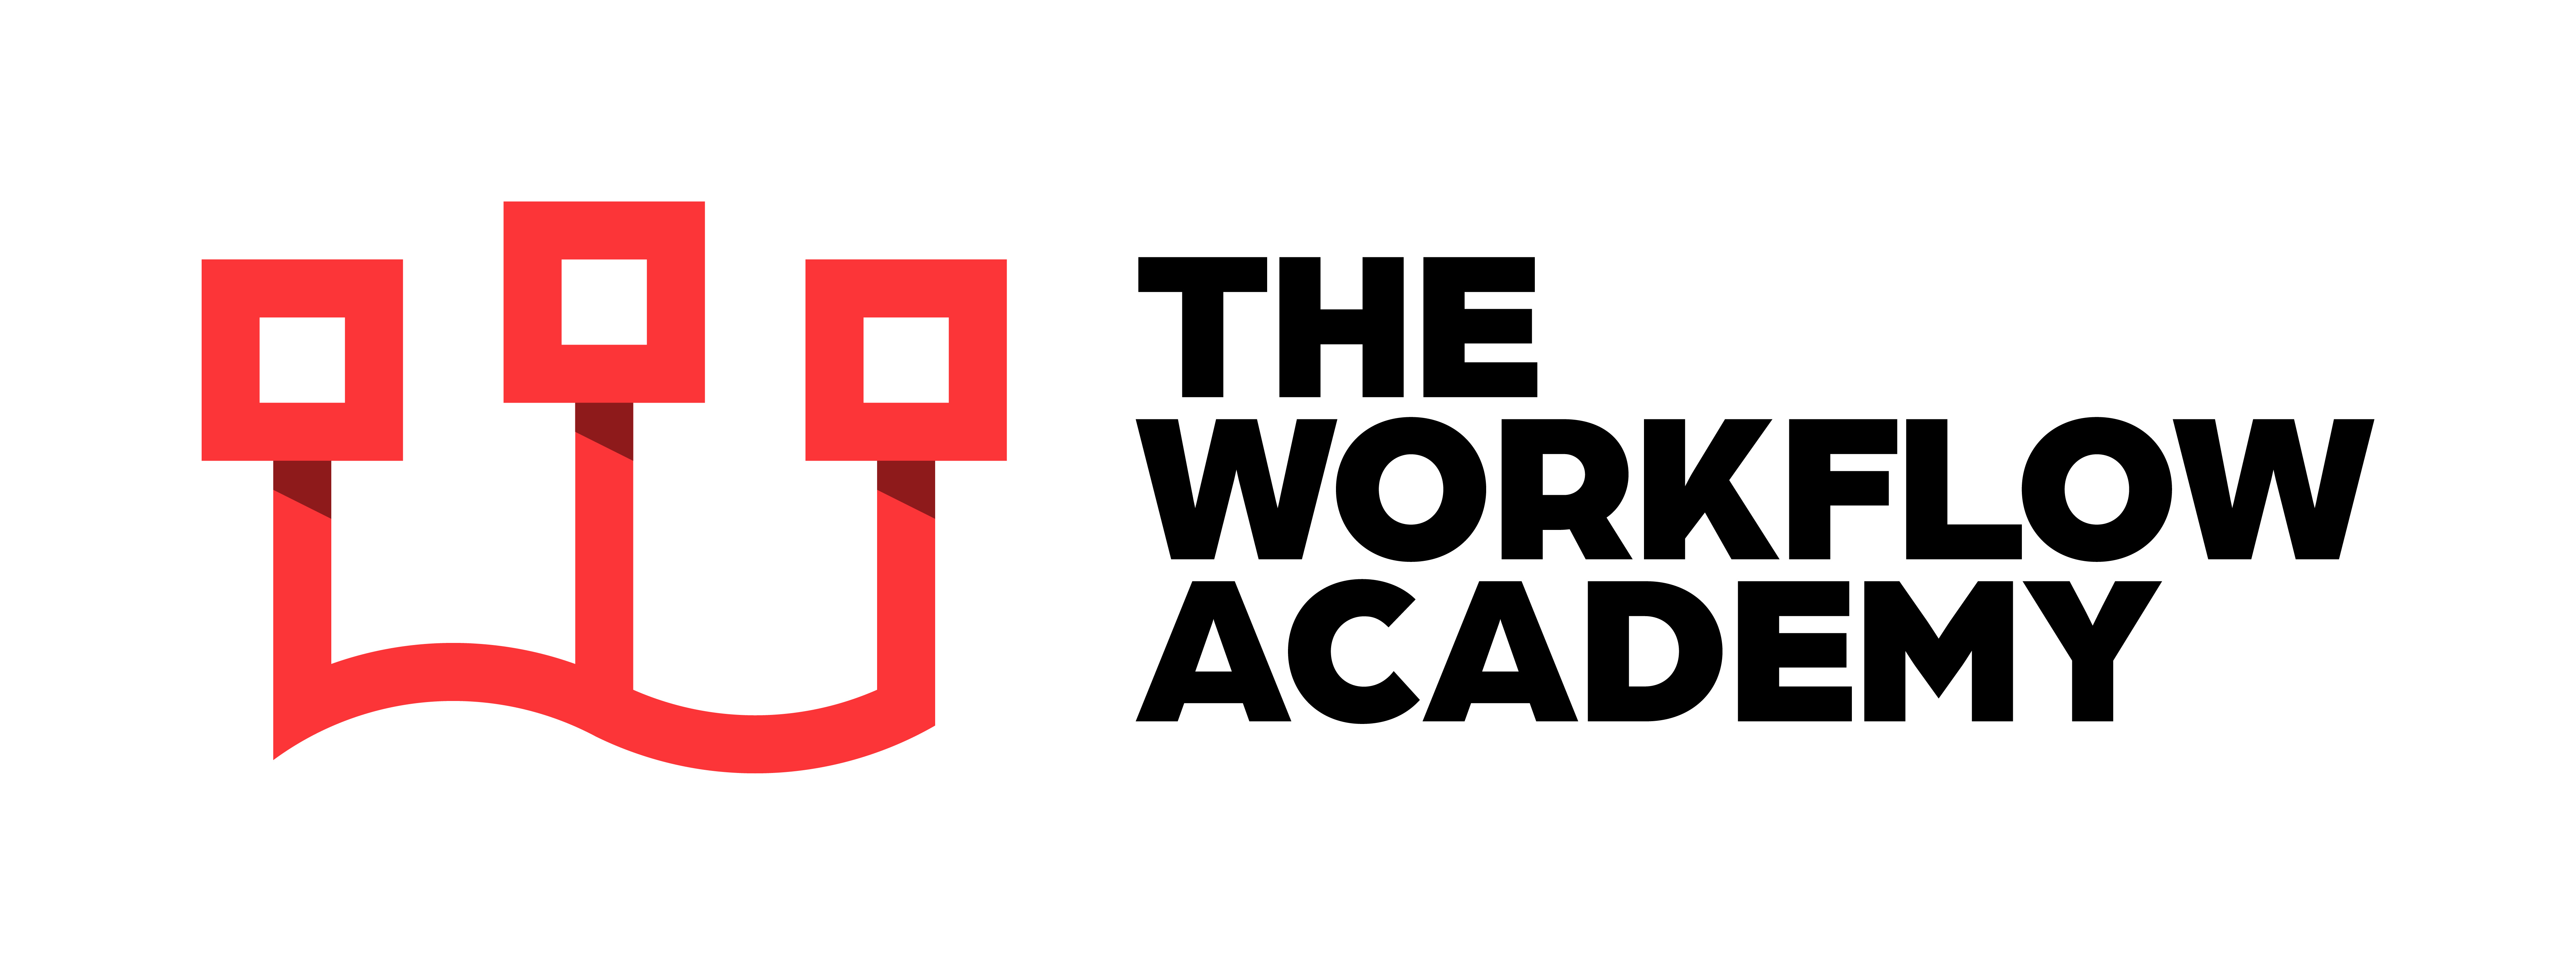 The Workflow Academy